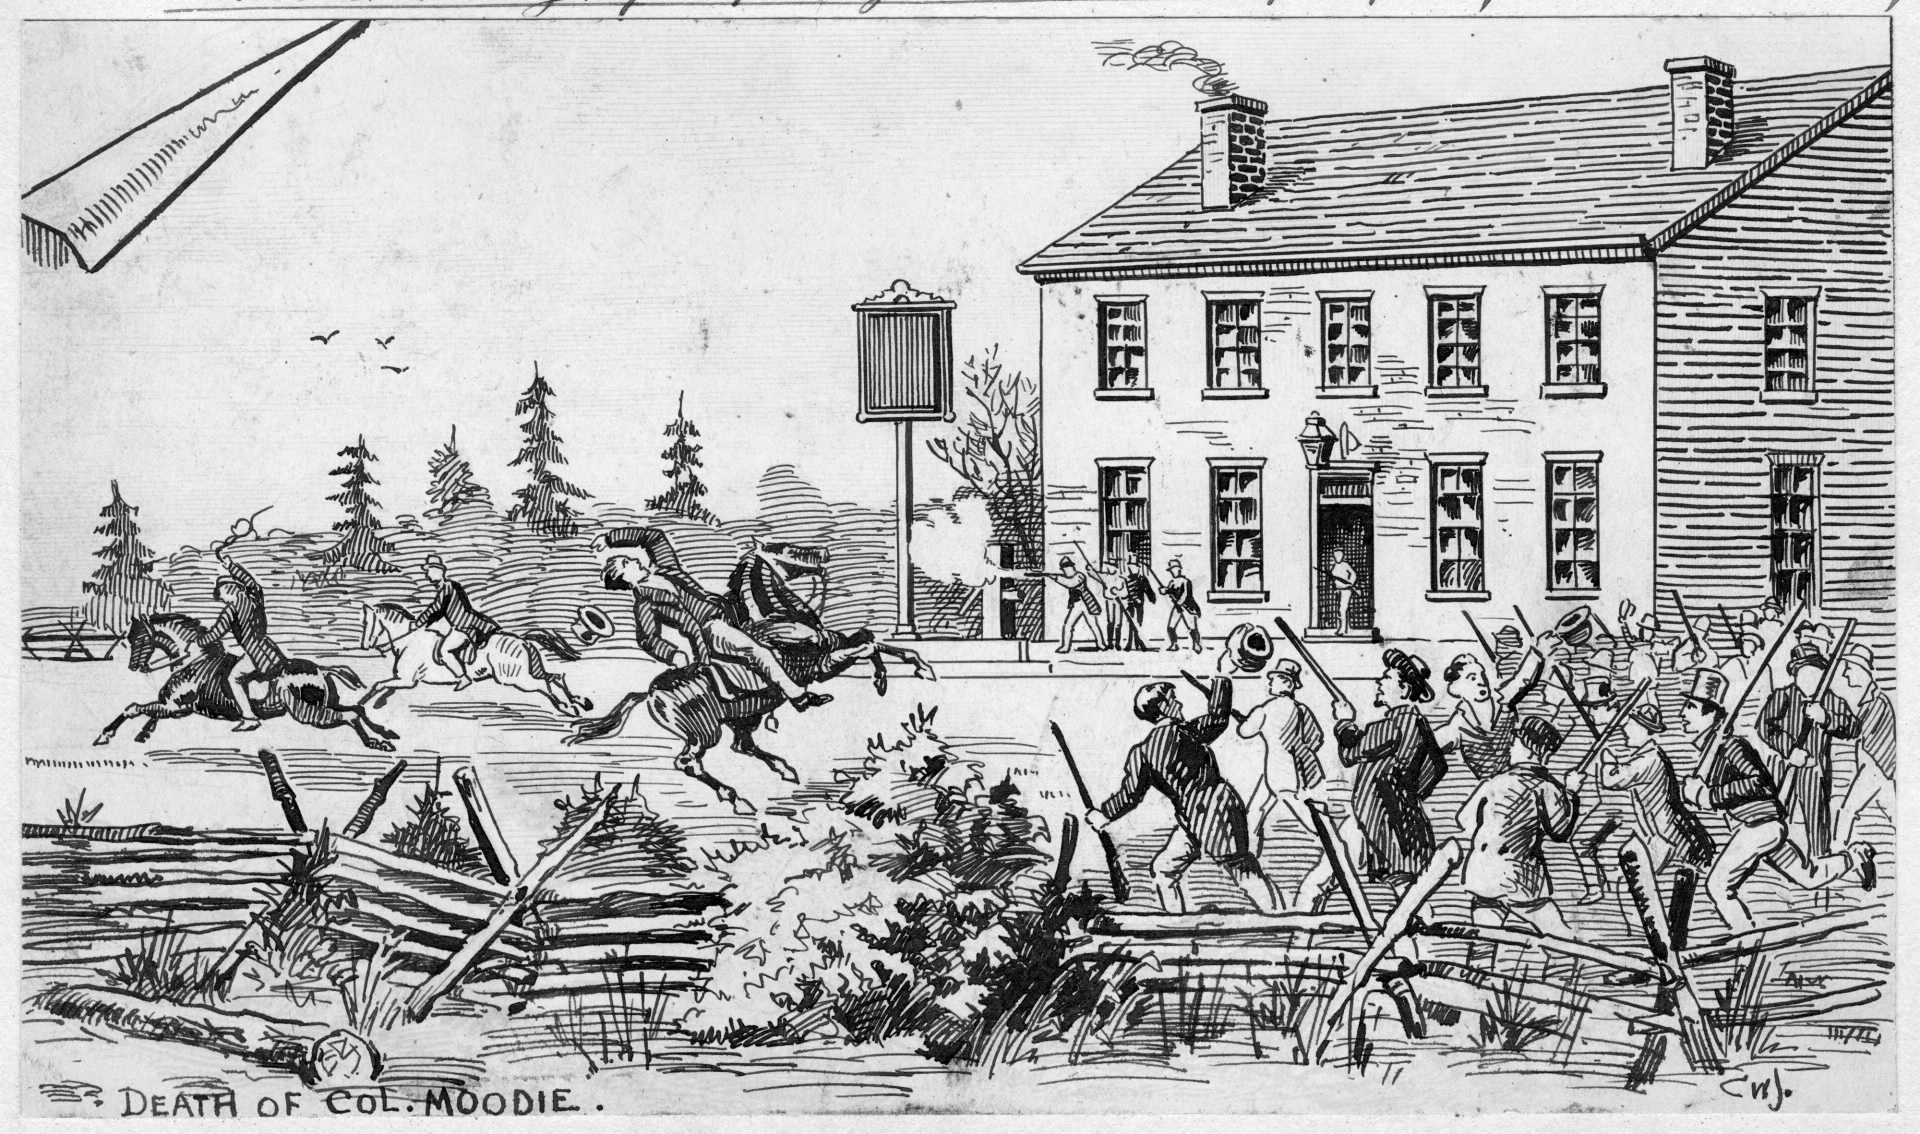 An illustration of the battle at Montgomery's Tavern showing the shooting of Col. Robert Moodie.